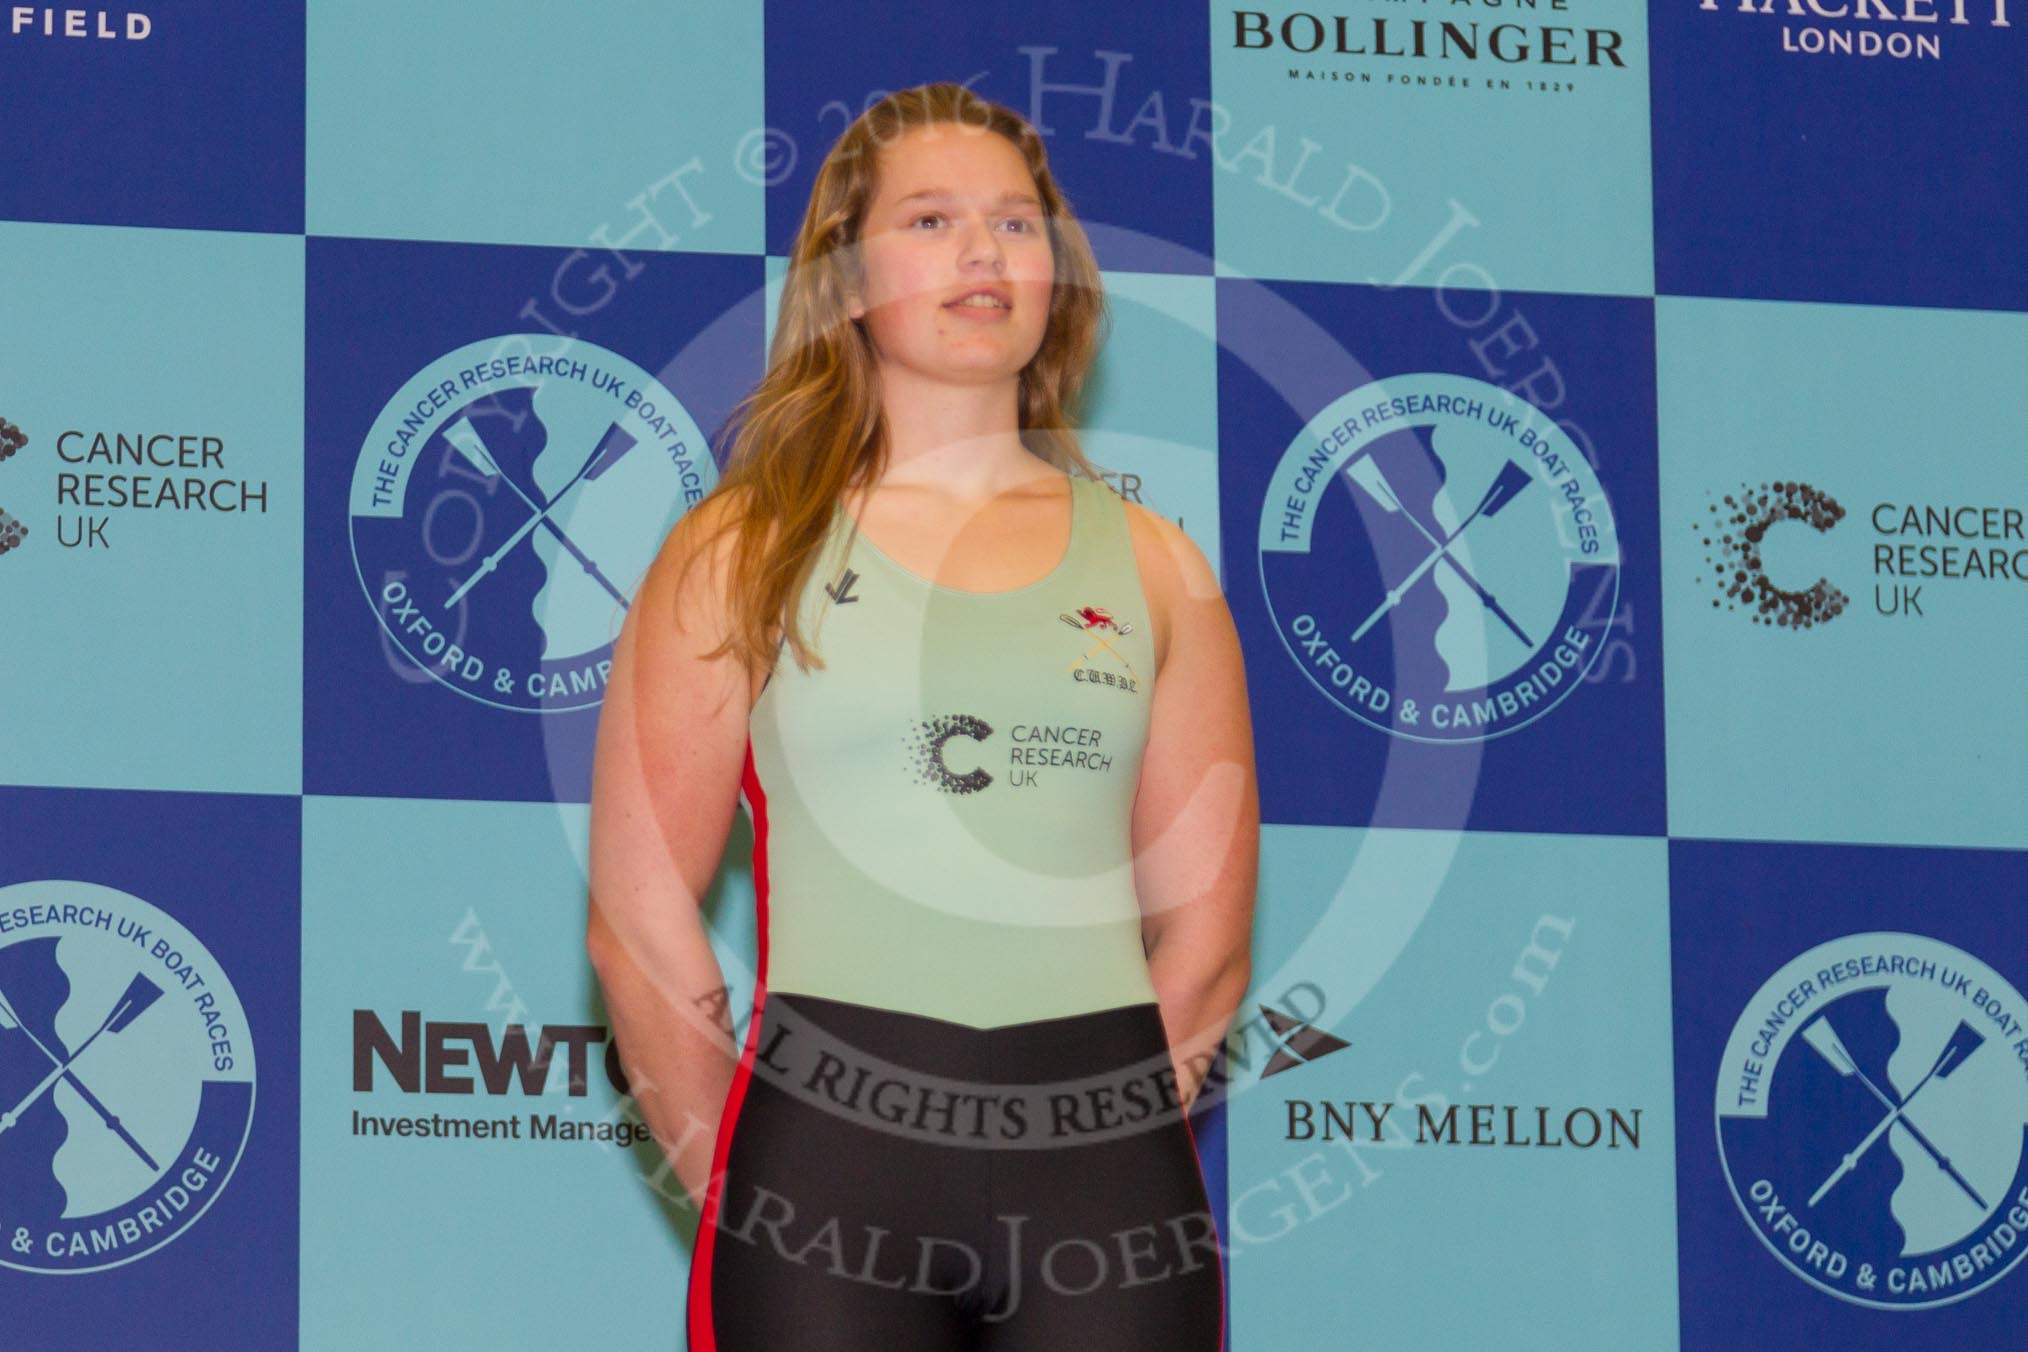 The Boat Race season 2016 - Crew Announcement and Weigh-In: The Women's Boat Race, 3 seat: Cambridge: Alice Jackson – 77.2kg.
Westmister Hall, Westminster,
London SW11,

United Kingdom,
on 01 March 2016 at 10:10, image #27